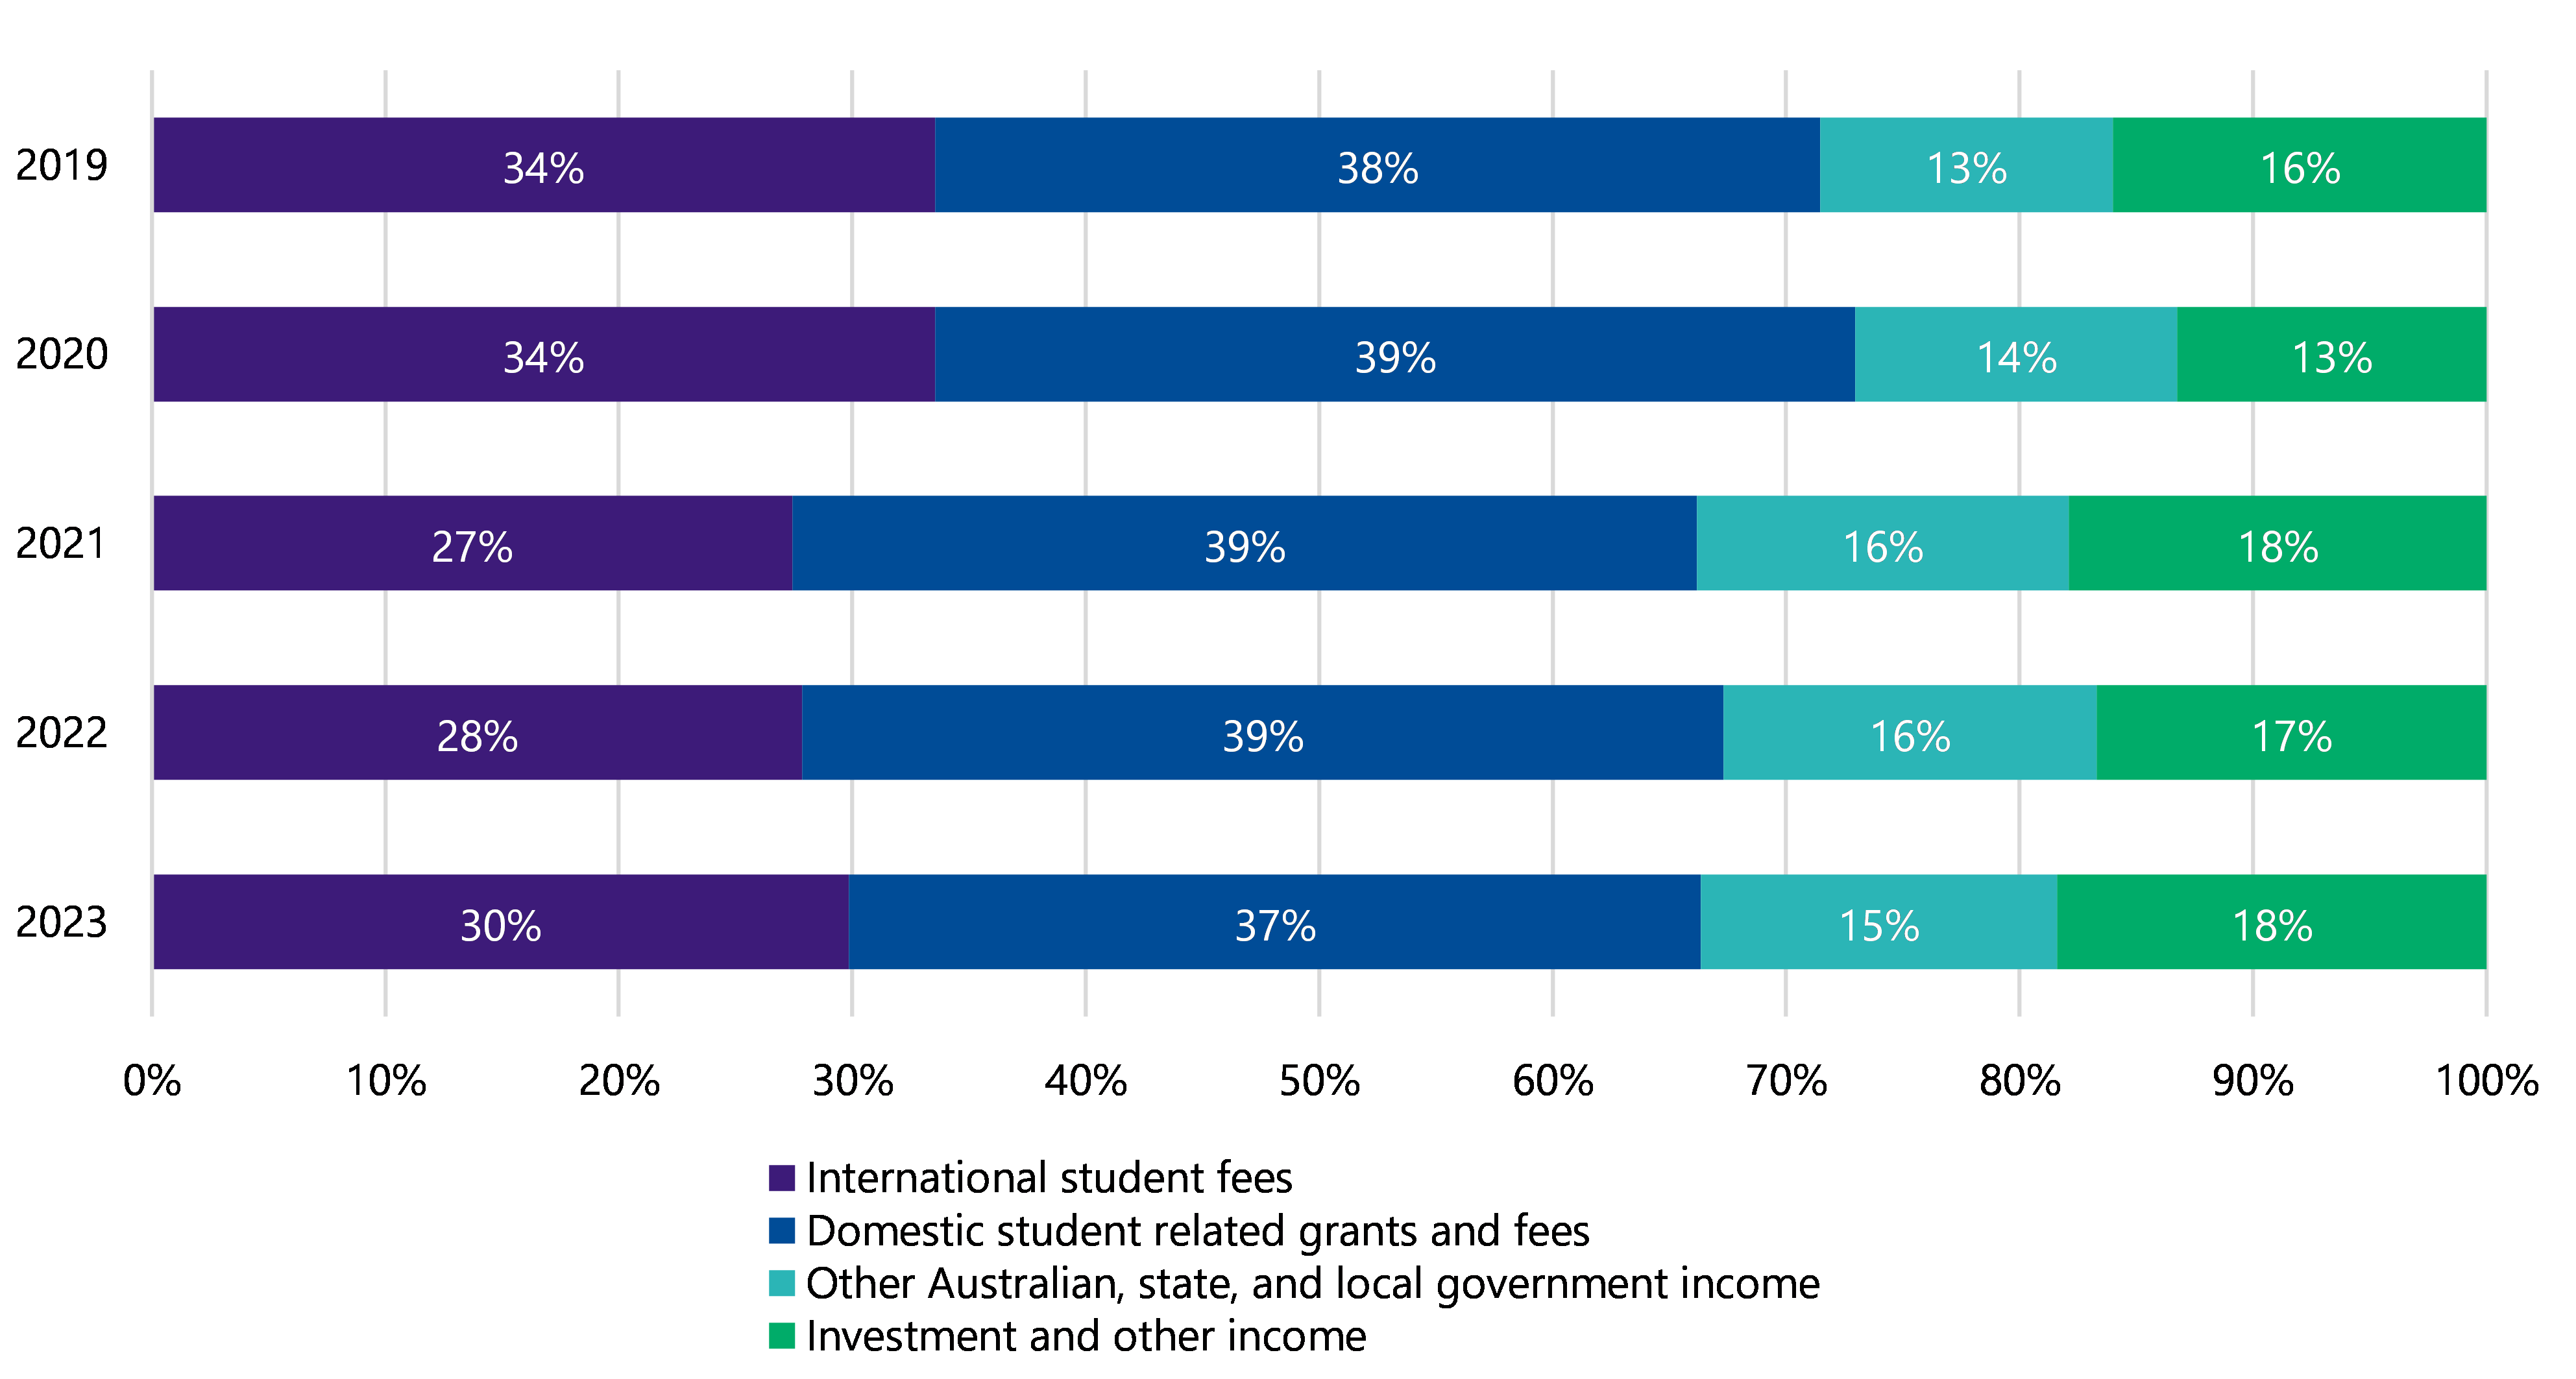 Figure 13 is a stacked bar chart that shows international student fees reduced from 34% in 2019 to 30% in 2023; domestic student-related grants and fees stayed about the same during these years (38% to 37%); other Australian, state, and local government income increased slightly from 13% in 2019 to 15% in 2023; and investment and other income increased slightly, from 16% in 2019 to 18% in 2023.